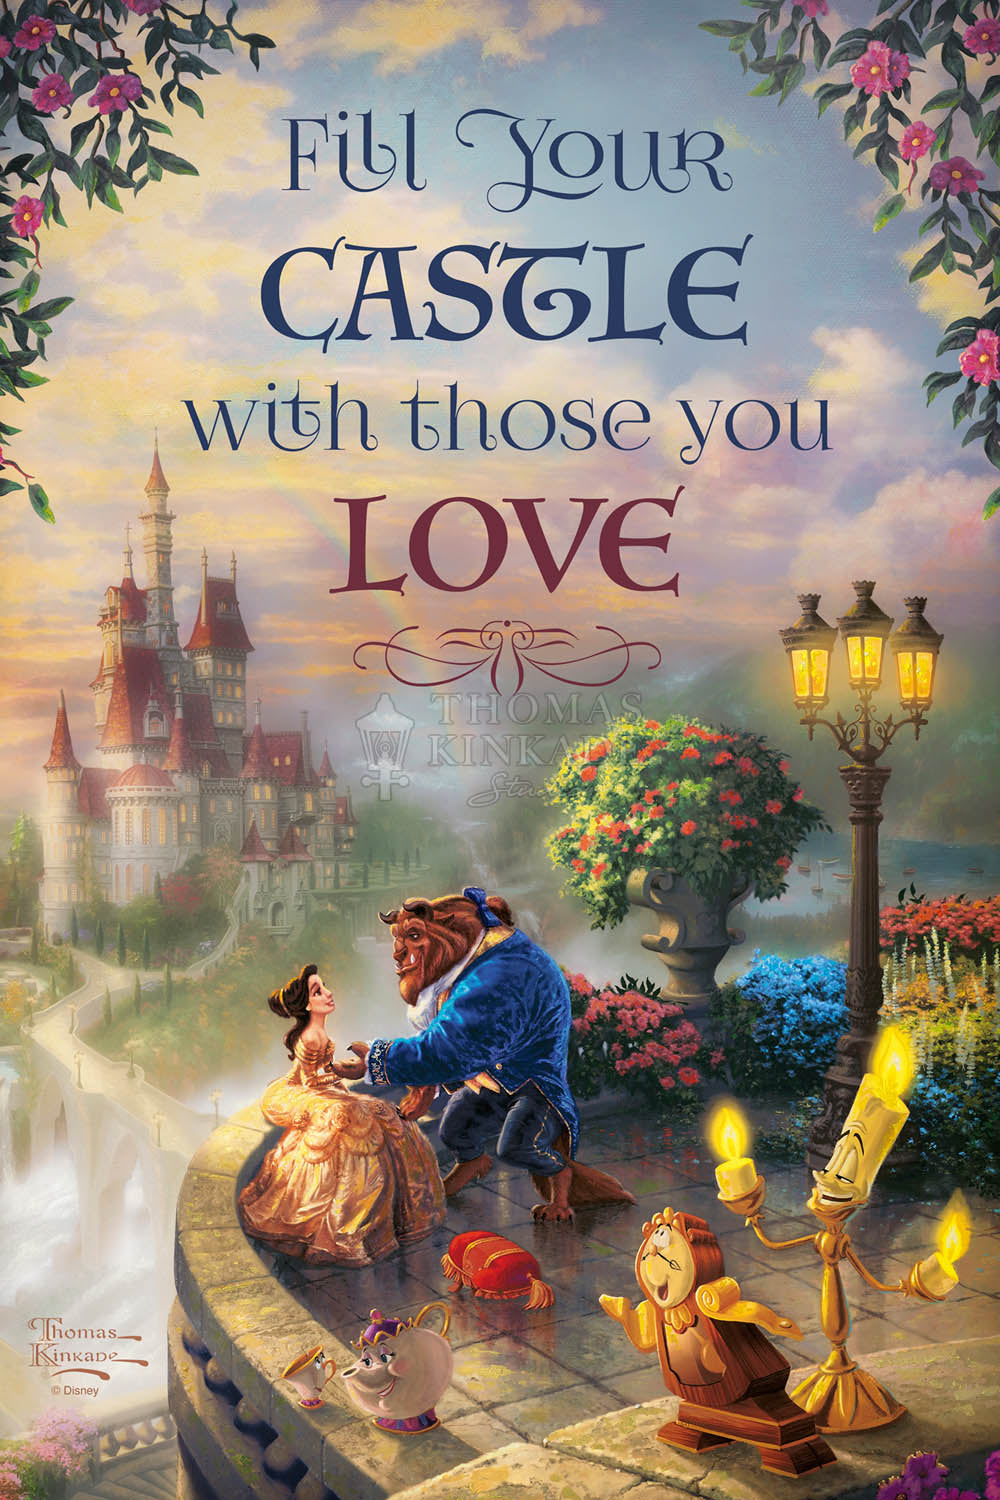  Fill your CASTLE with those you LOVE!  This scene has depicted the story from the townspeople, Belle and the Beast, upon the castle's veranda with Cogsworth, Mrs. Potts, and of course, Lumiere gathers around. - Wood Sign